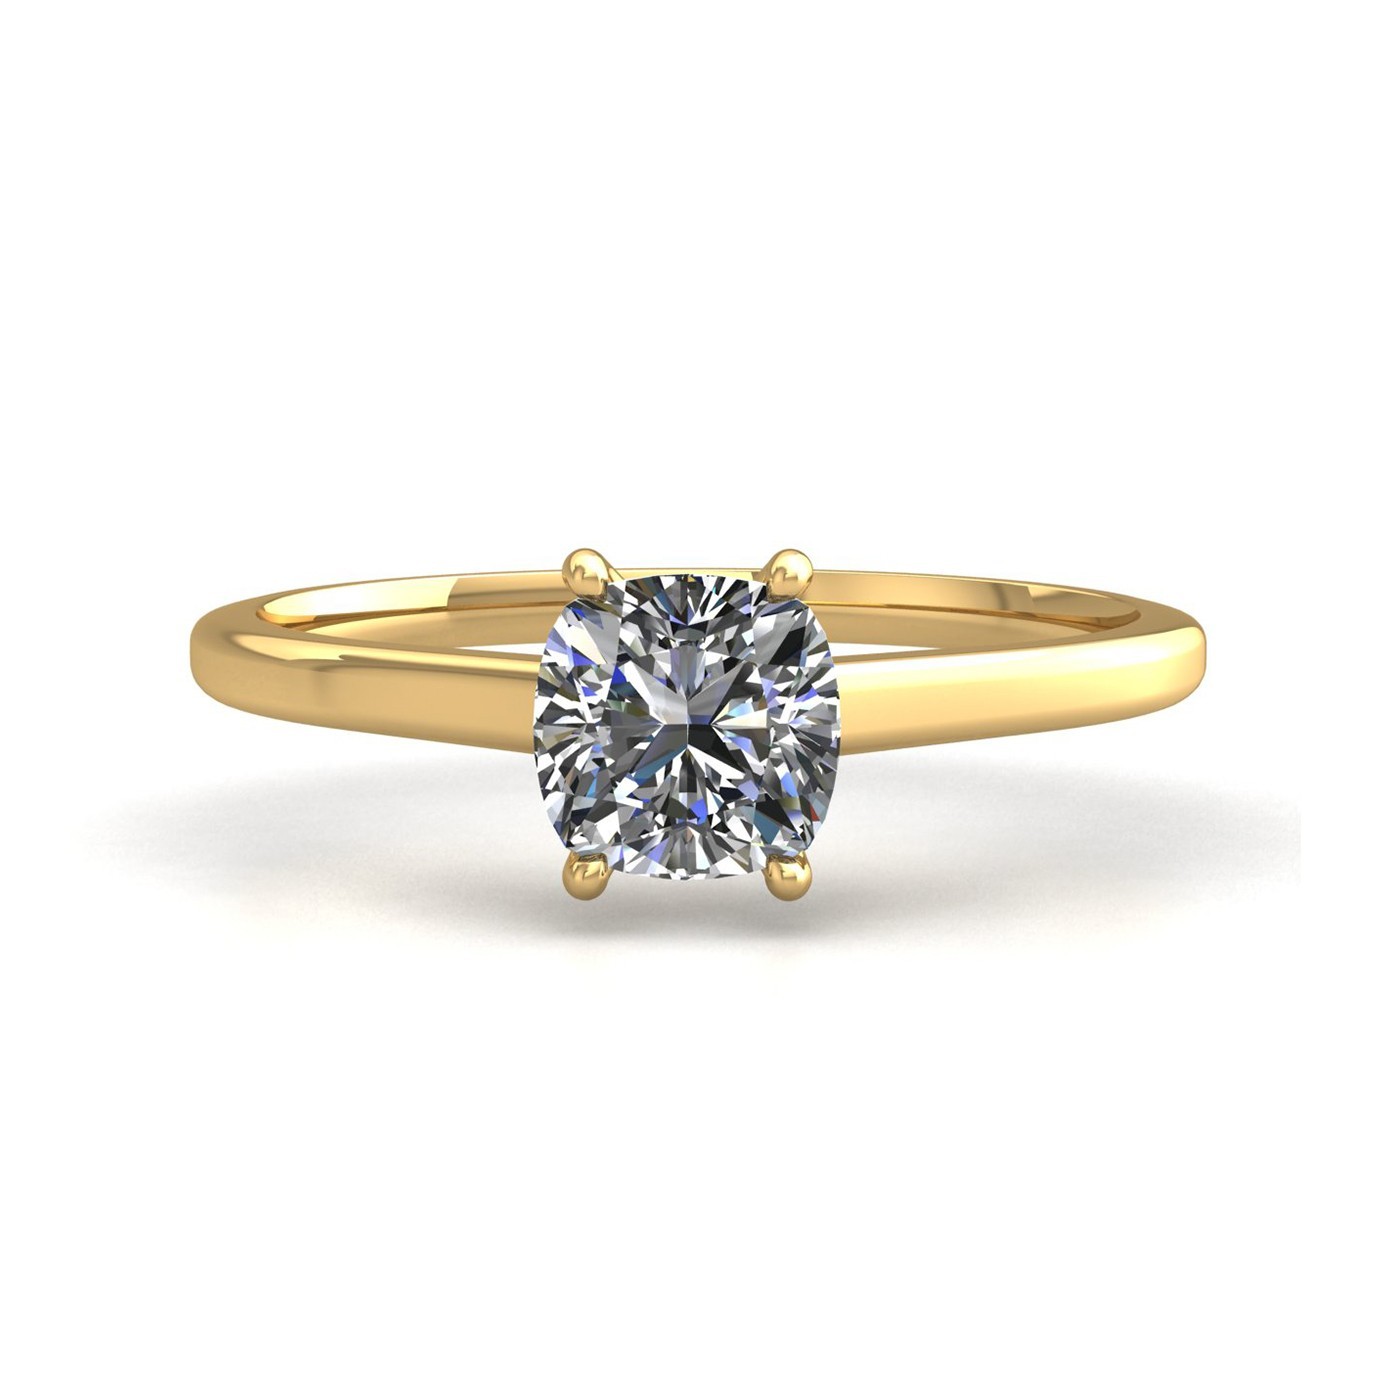 18k yellow gold 1.5ct 4 prongs solitaire cushion cut diamond engagement ring with whisper thin band Photos & images